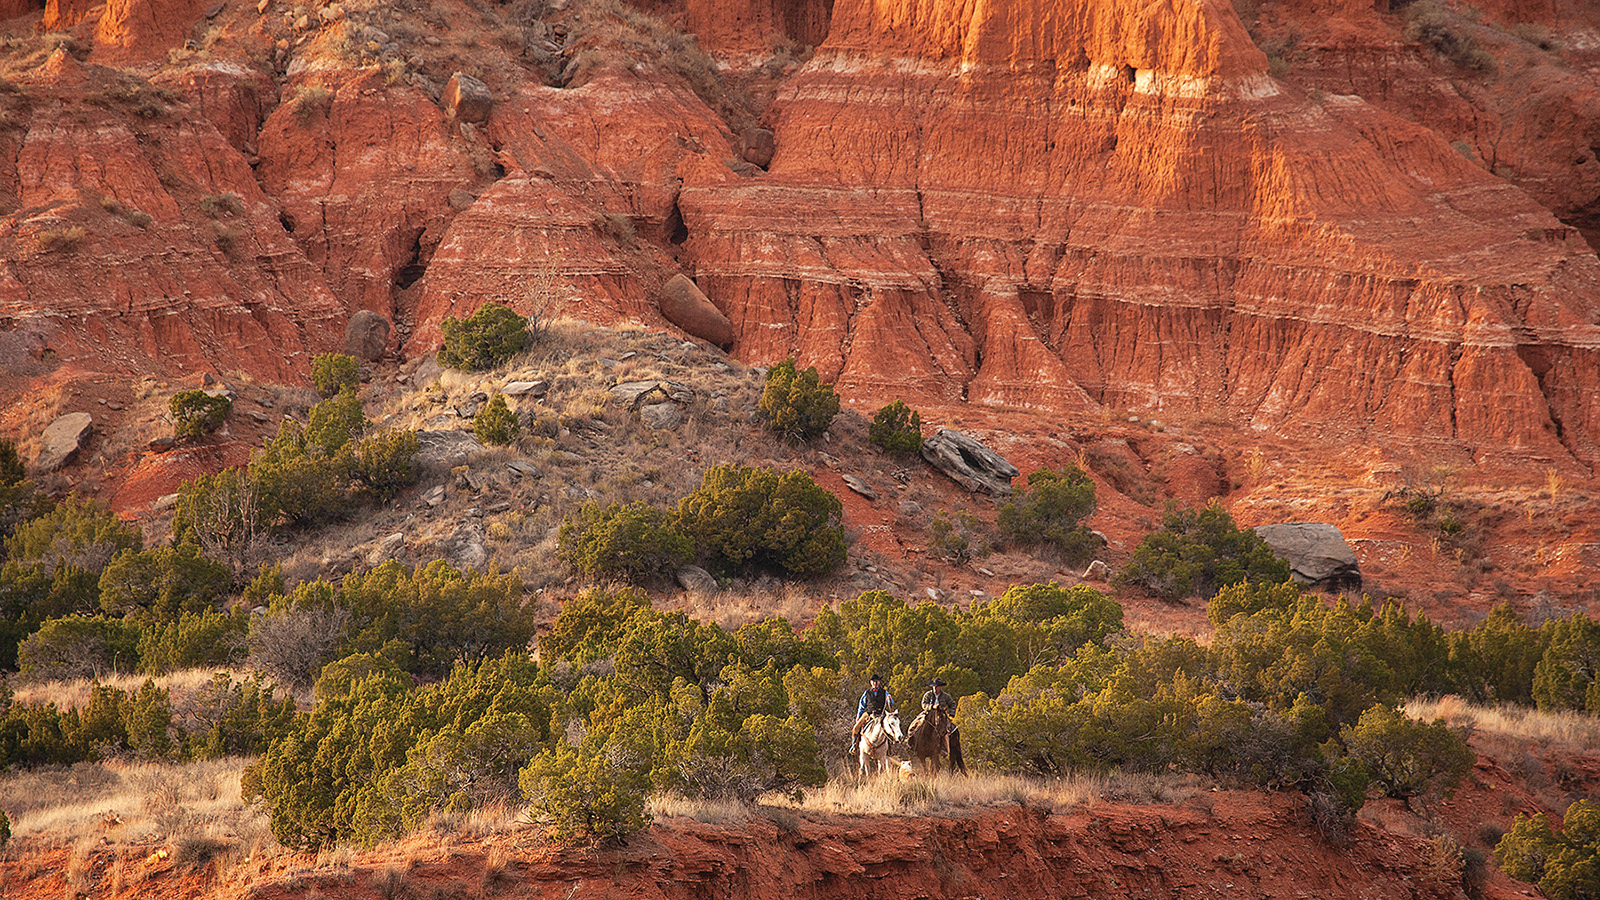 Palo Duro Canyon can seem larger in life when visited in person.